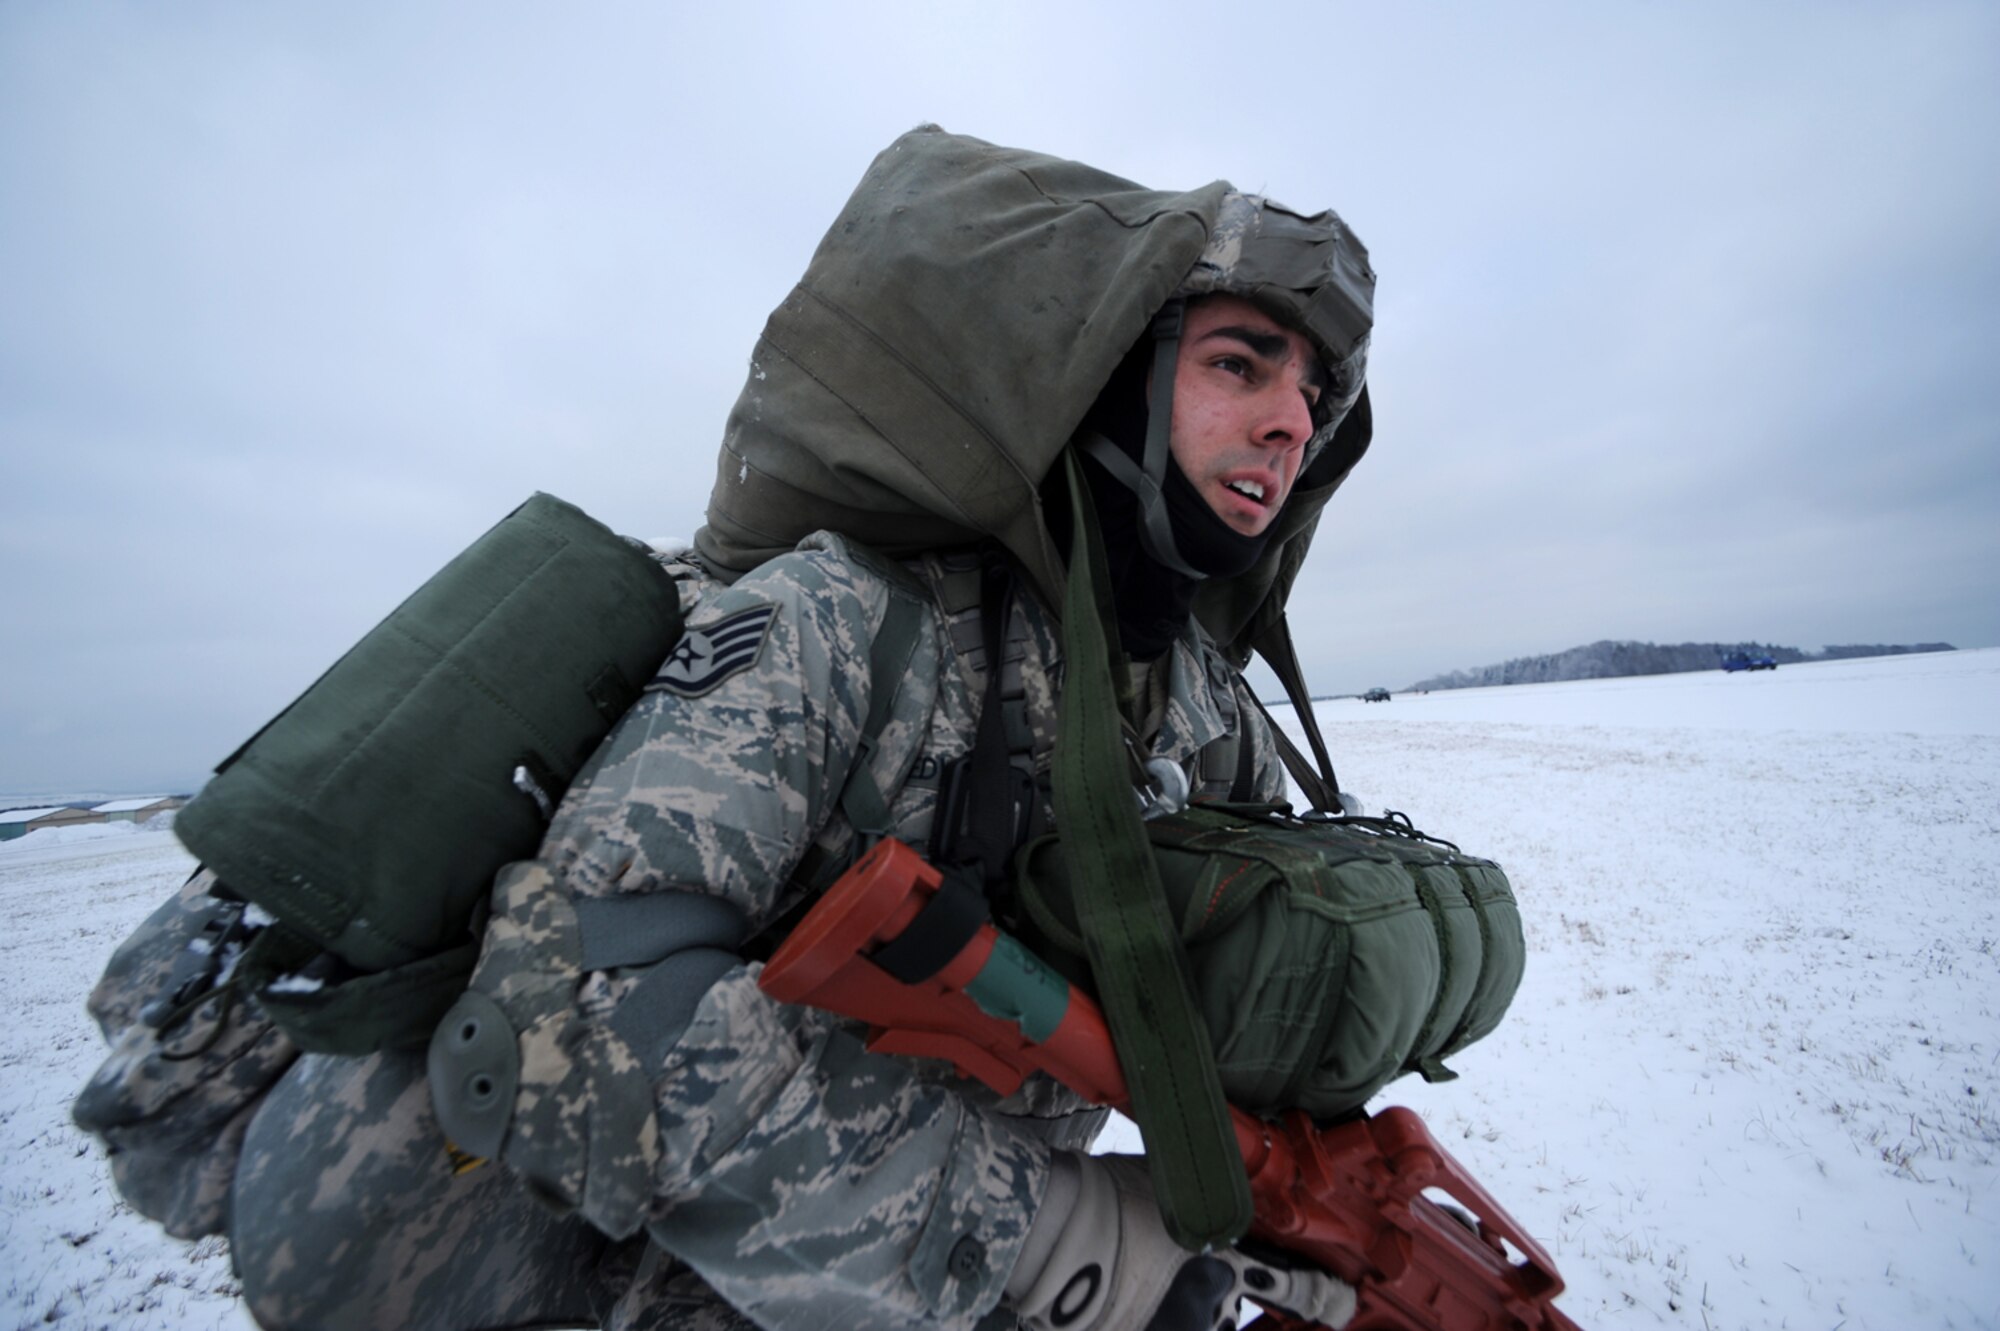 U.S. Air Force Staff Sgt. Dave Edwards, 435th Security Forces Squadron, Sembach Annex, Germany, maneuvers toward a rally point after an airborne insertion mission, Flugplatz Bitburg, Germany, Jan. 25, 2010, in preparation of Ramstein's operational readiness inspection in September. The unit is setting up bare-base operations as part of the dual-wing operational readiness exercise with the 86th Airlift Wing. This is the second of five operational readiness exercises. (U.S. Air Force photo by Staff Sgt. Sarayuth Pinthong)